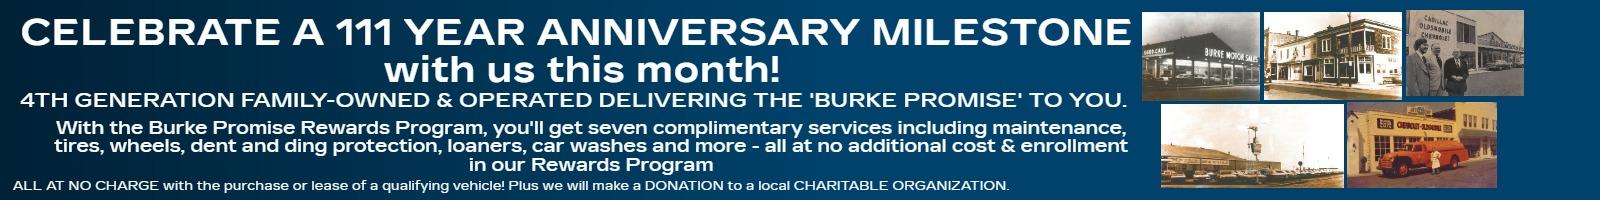 CELEBRATE A 110 YEAR ANNIVERSARY MILESTONE with us this month!
4th Generation Family-Owned & Operated delivering The 'Burke Promise' to you.

With the Burke Promise Rewards Program, you'll get seven complimentary services including maintenance, tires, wheels, dent and ding protection, loaners, car washes and more - all at no additional cost & enrollment in our Rewards Program